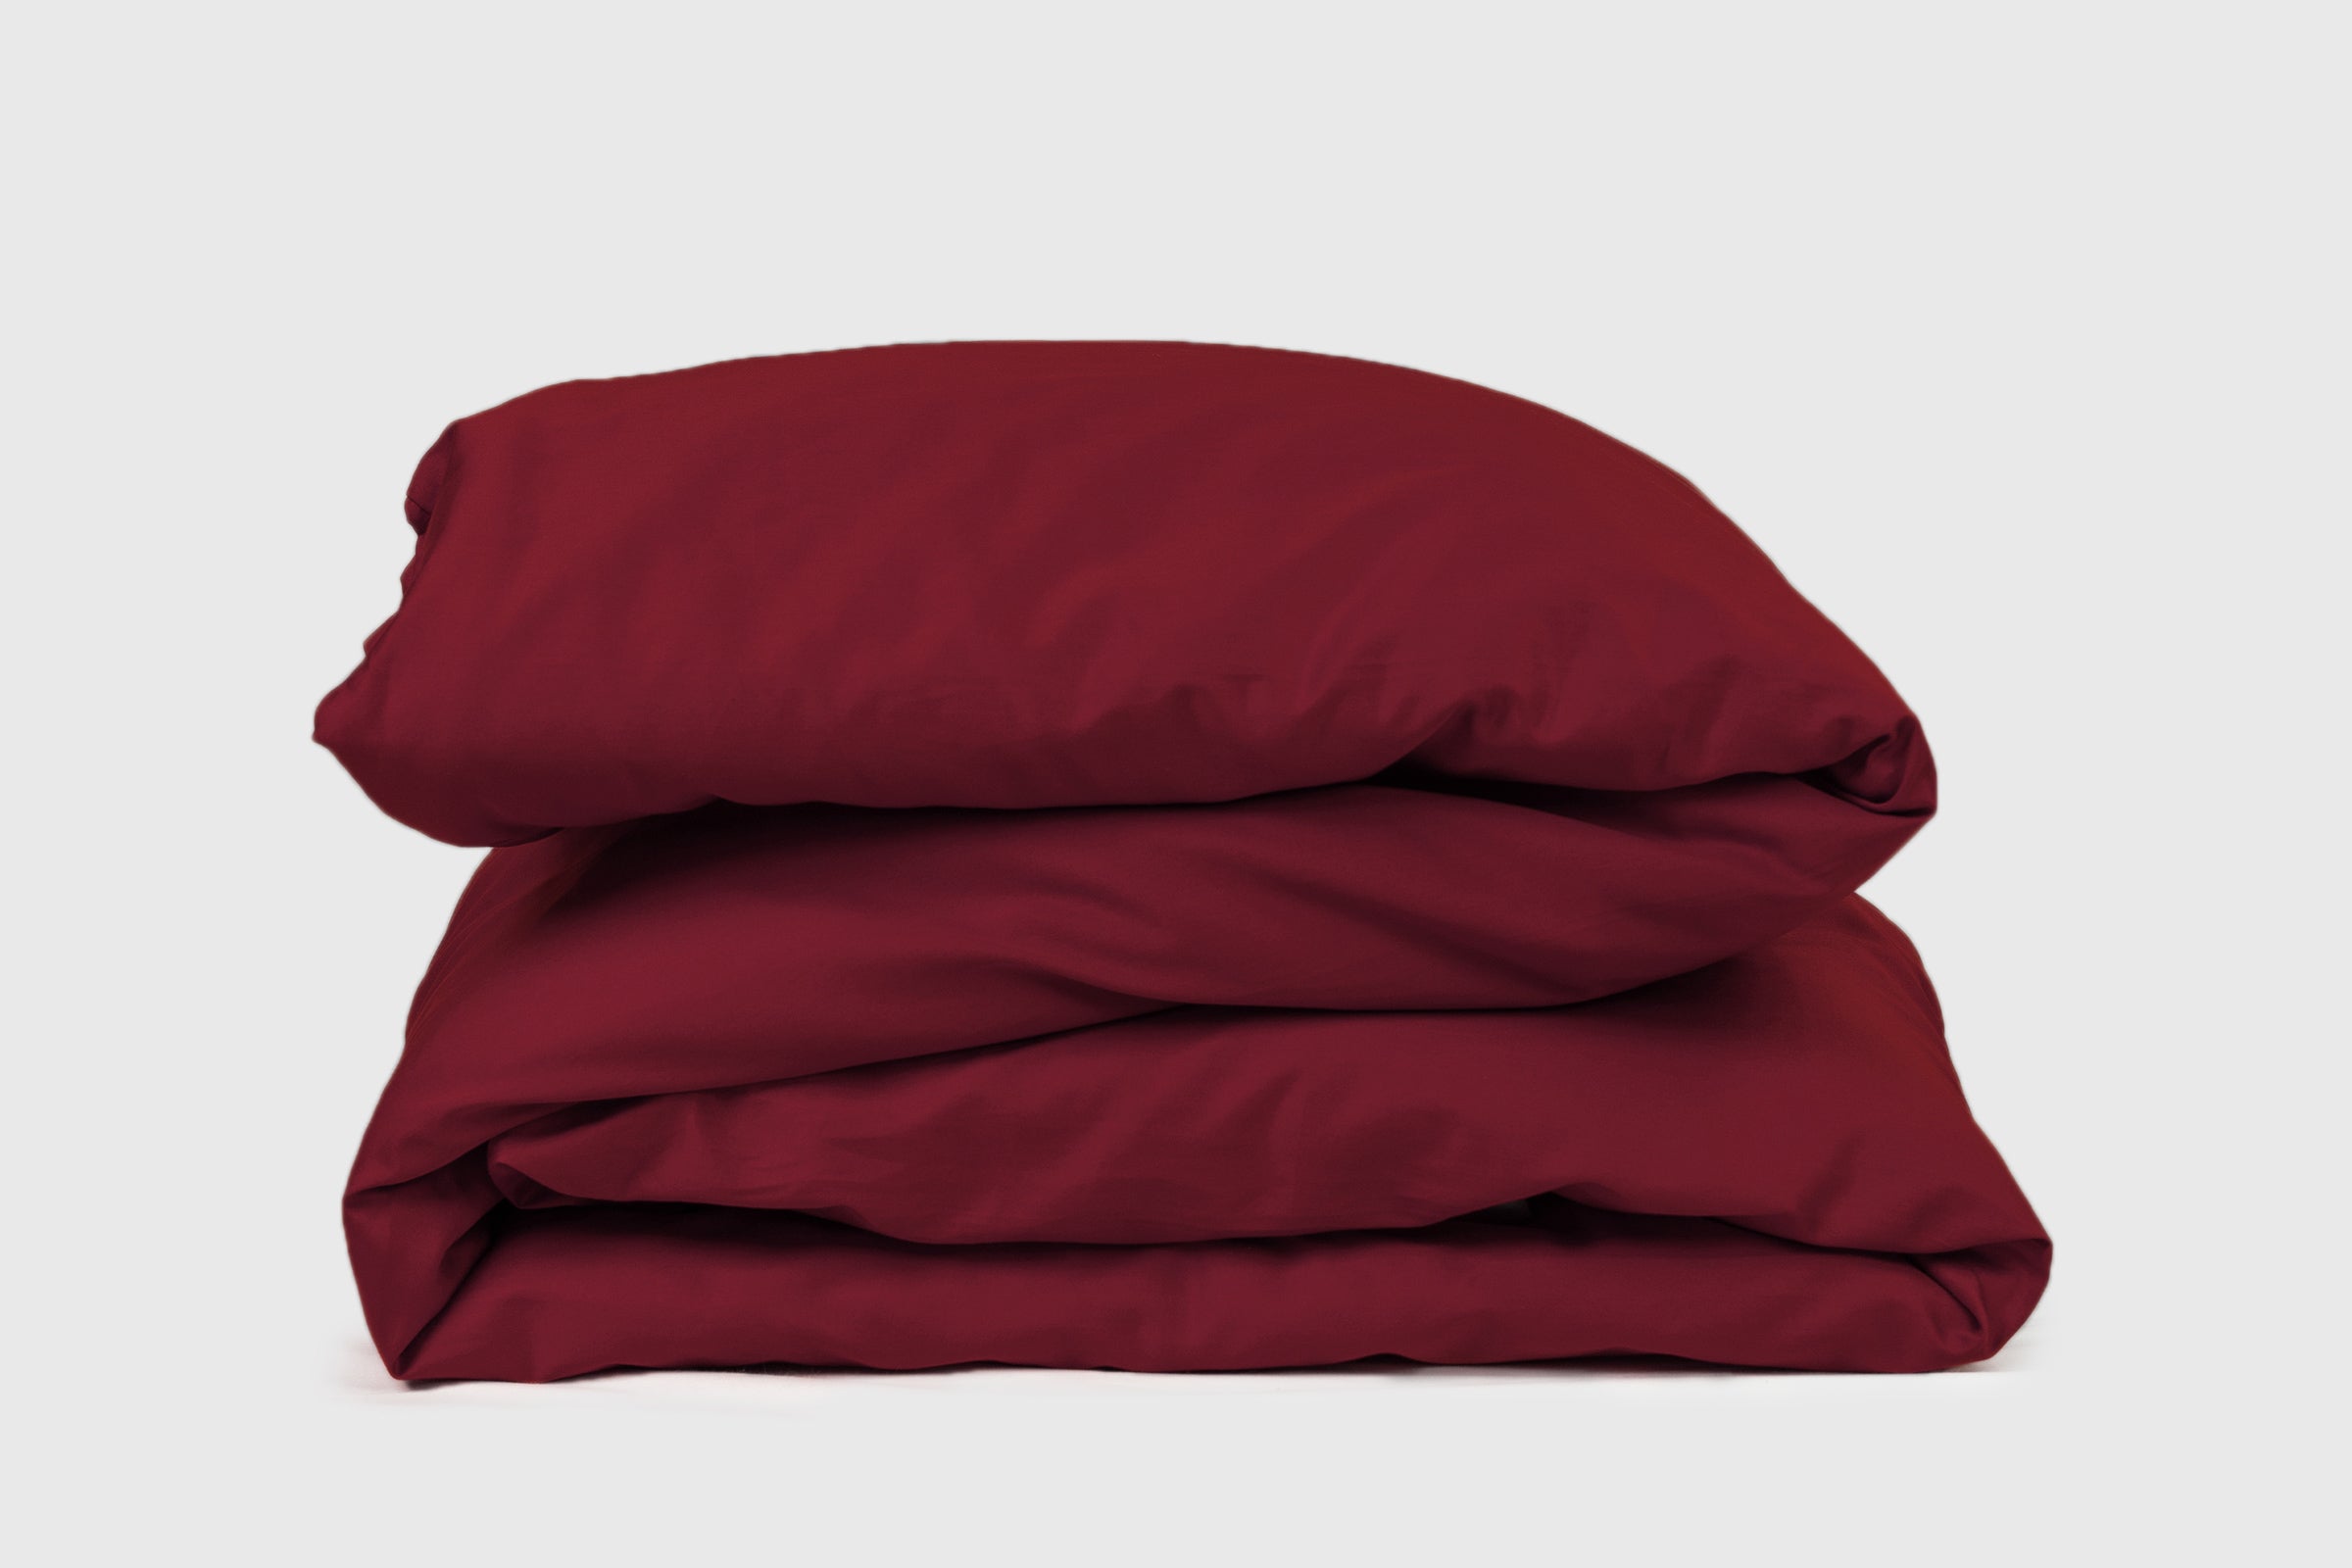 classic-wine-duvet-cover-product-shot-by-sojao.jpg